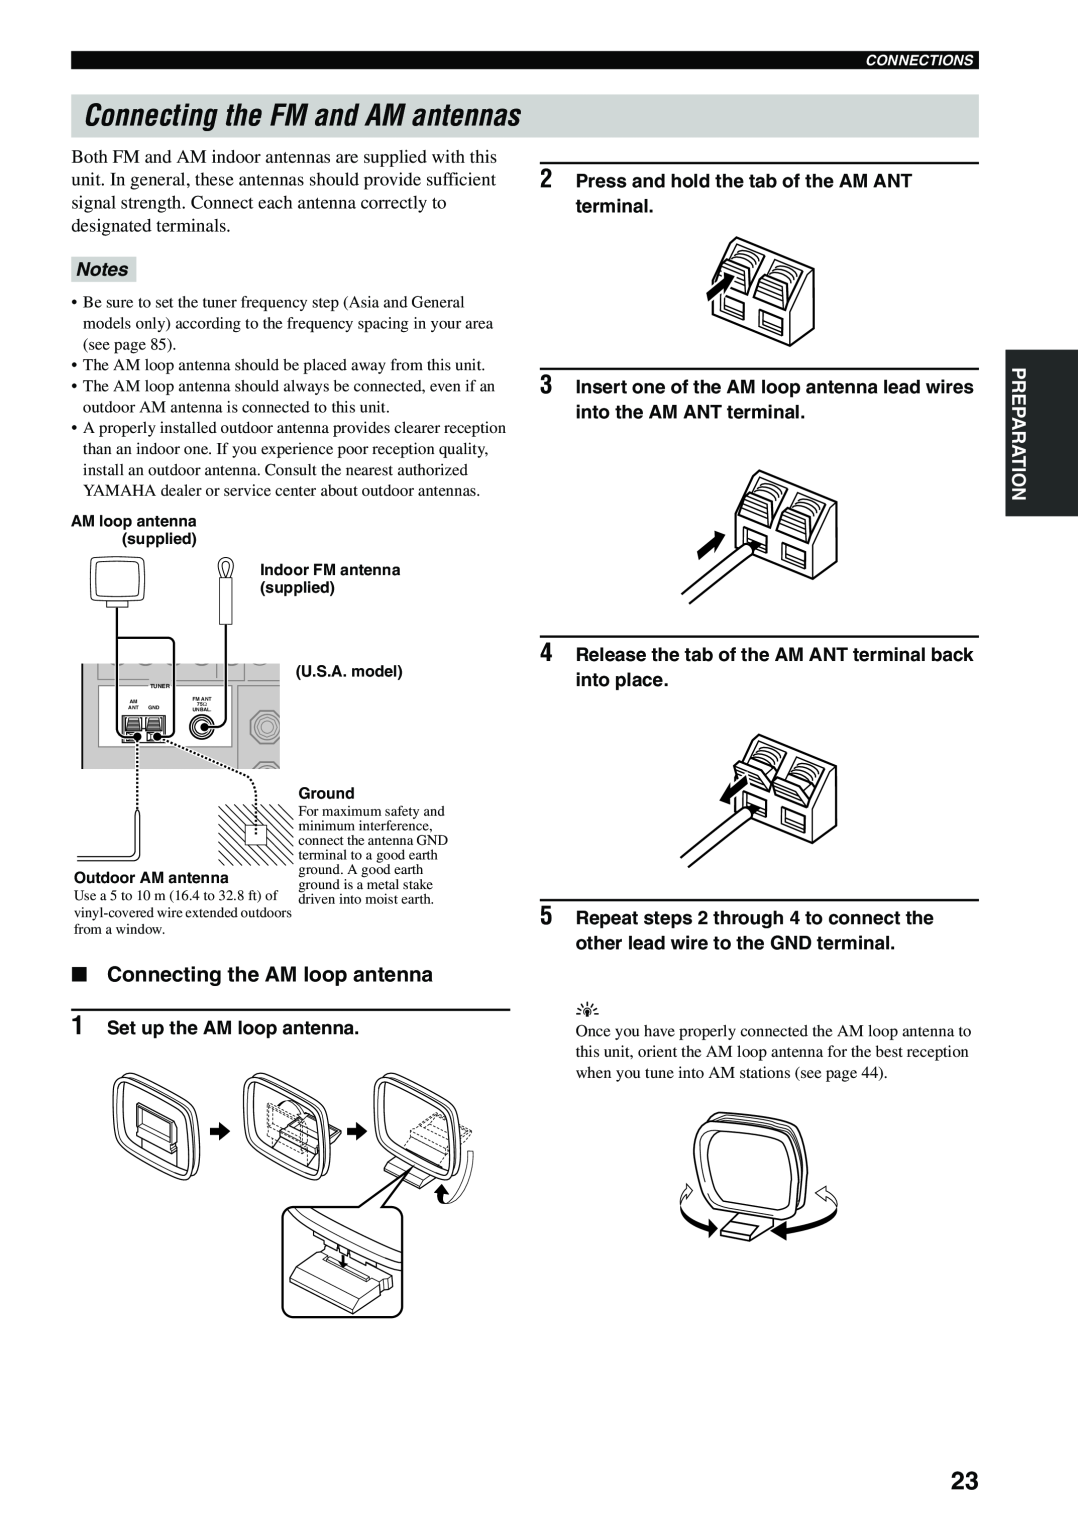 Yamaha HTR-5940 owner manual Connecting the FM and AM antennas, Connecting the AM loop antenna, Notes 